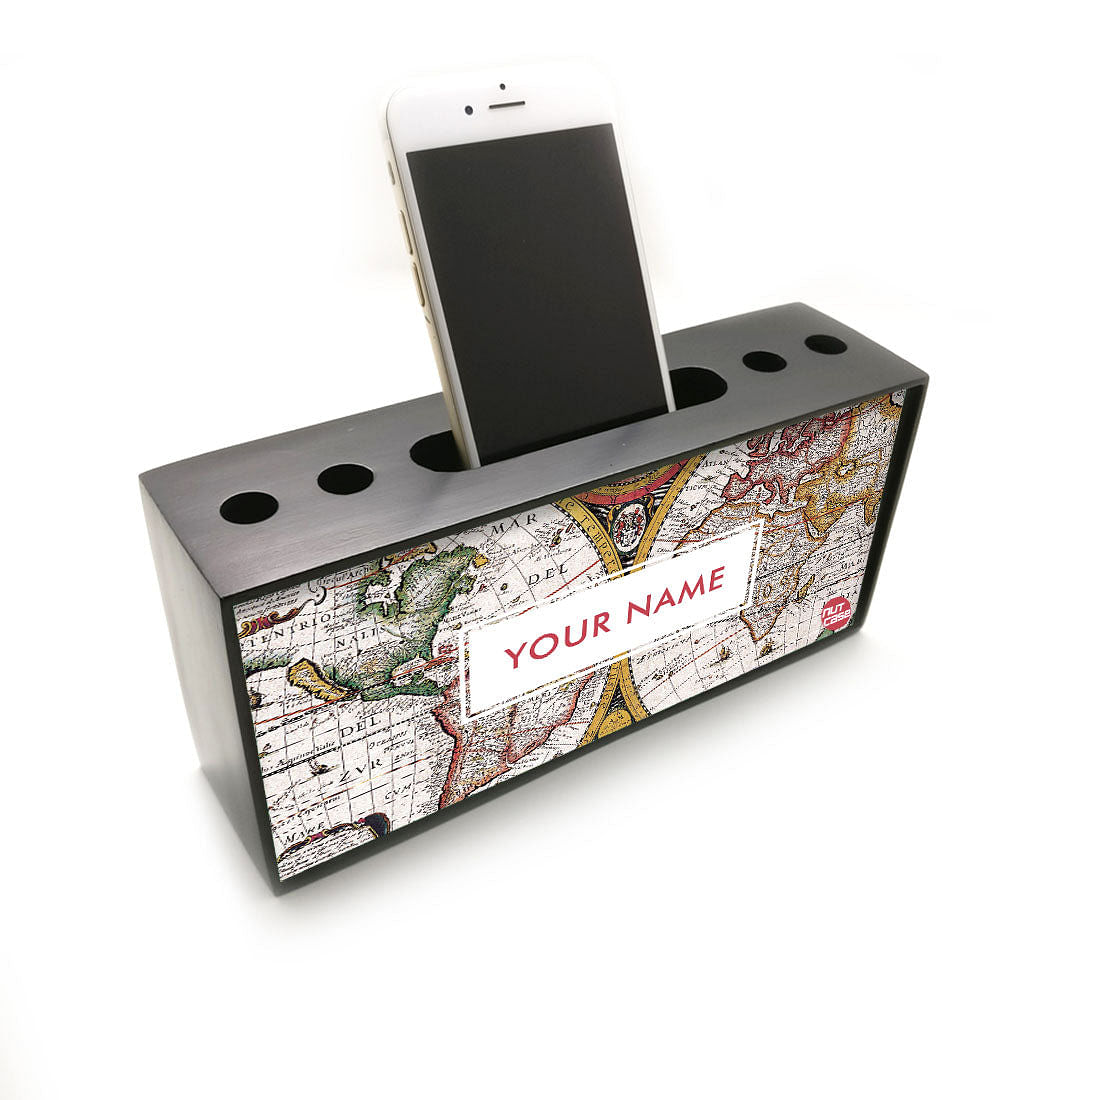 New Custom Mobile Stand Holder - Corporate Gift for Travel Tourism Industry Nutcase